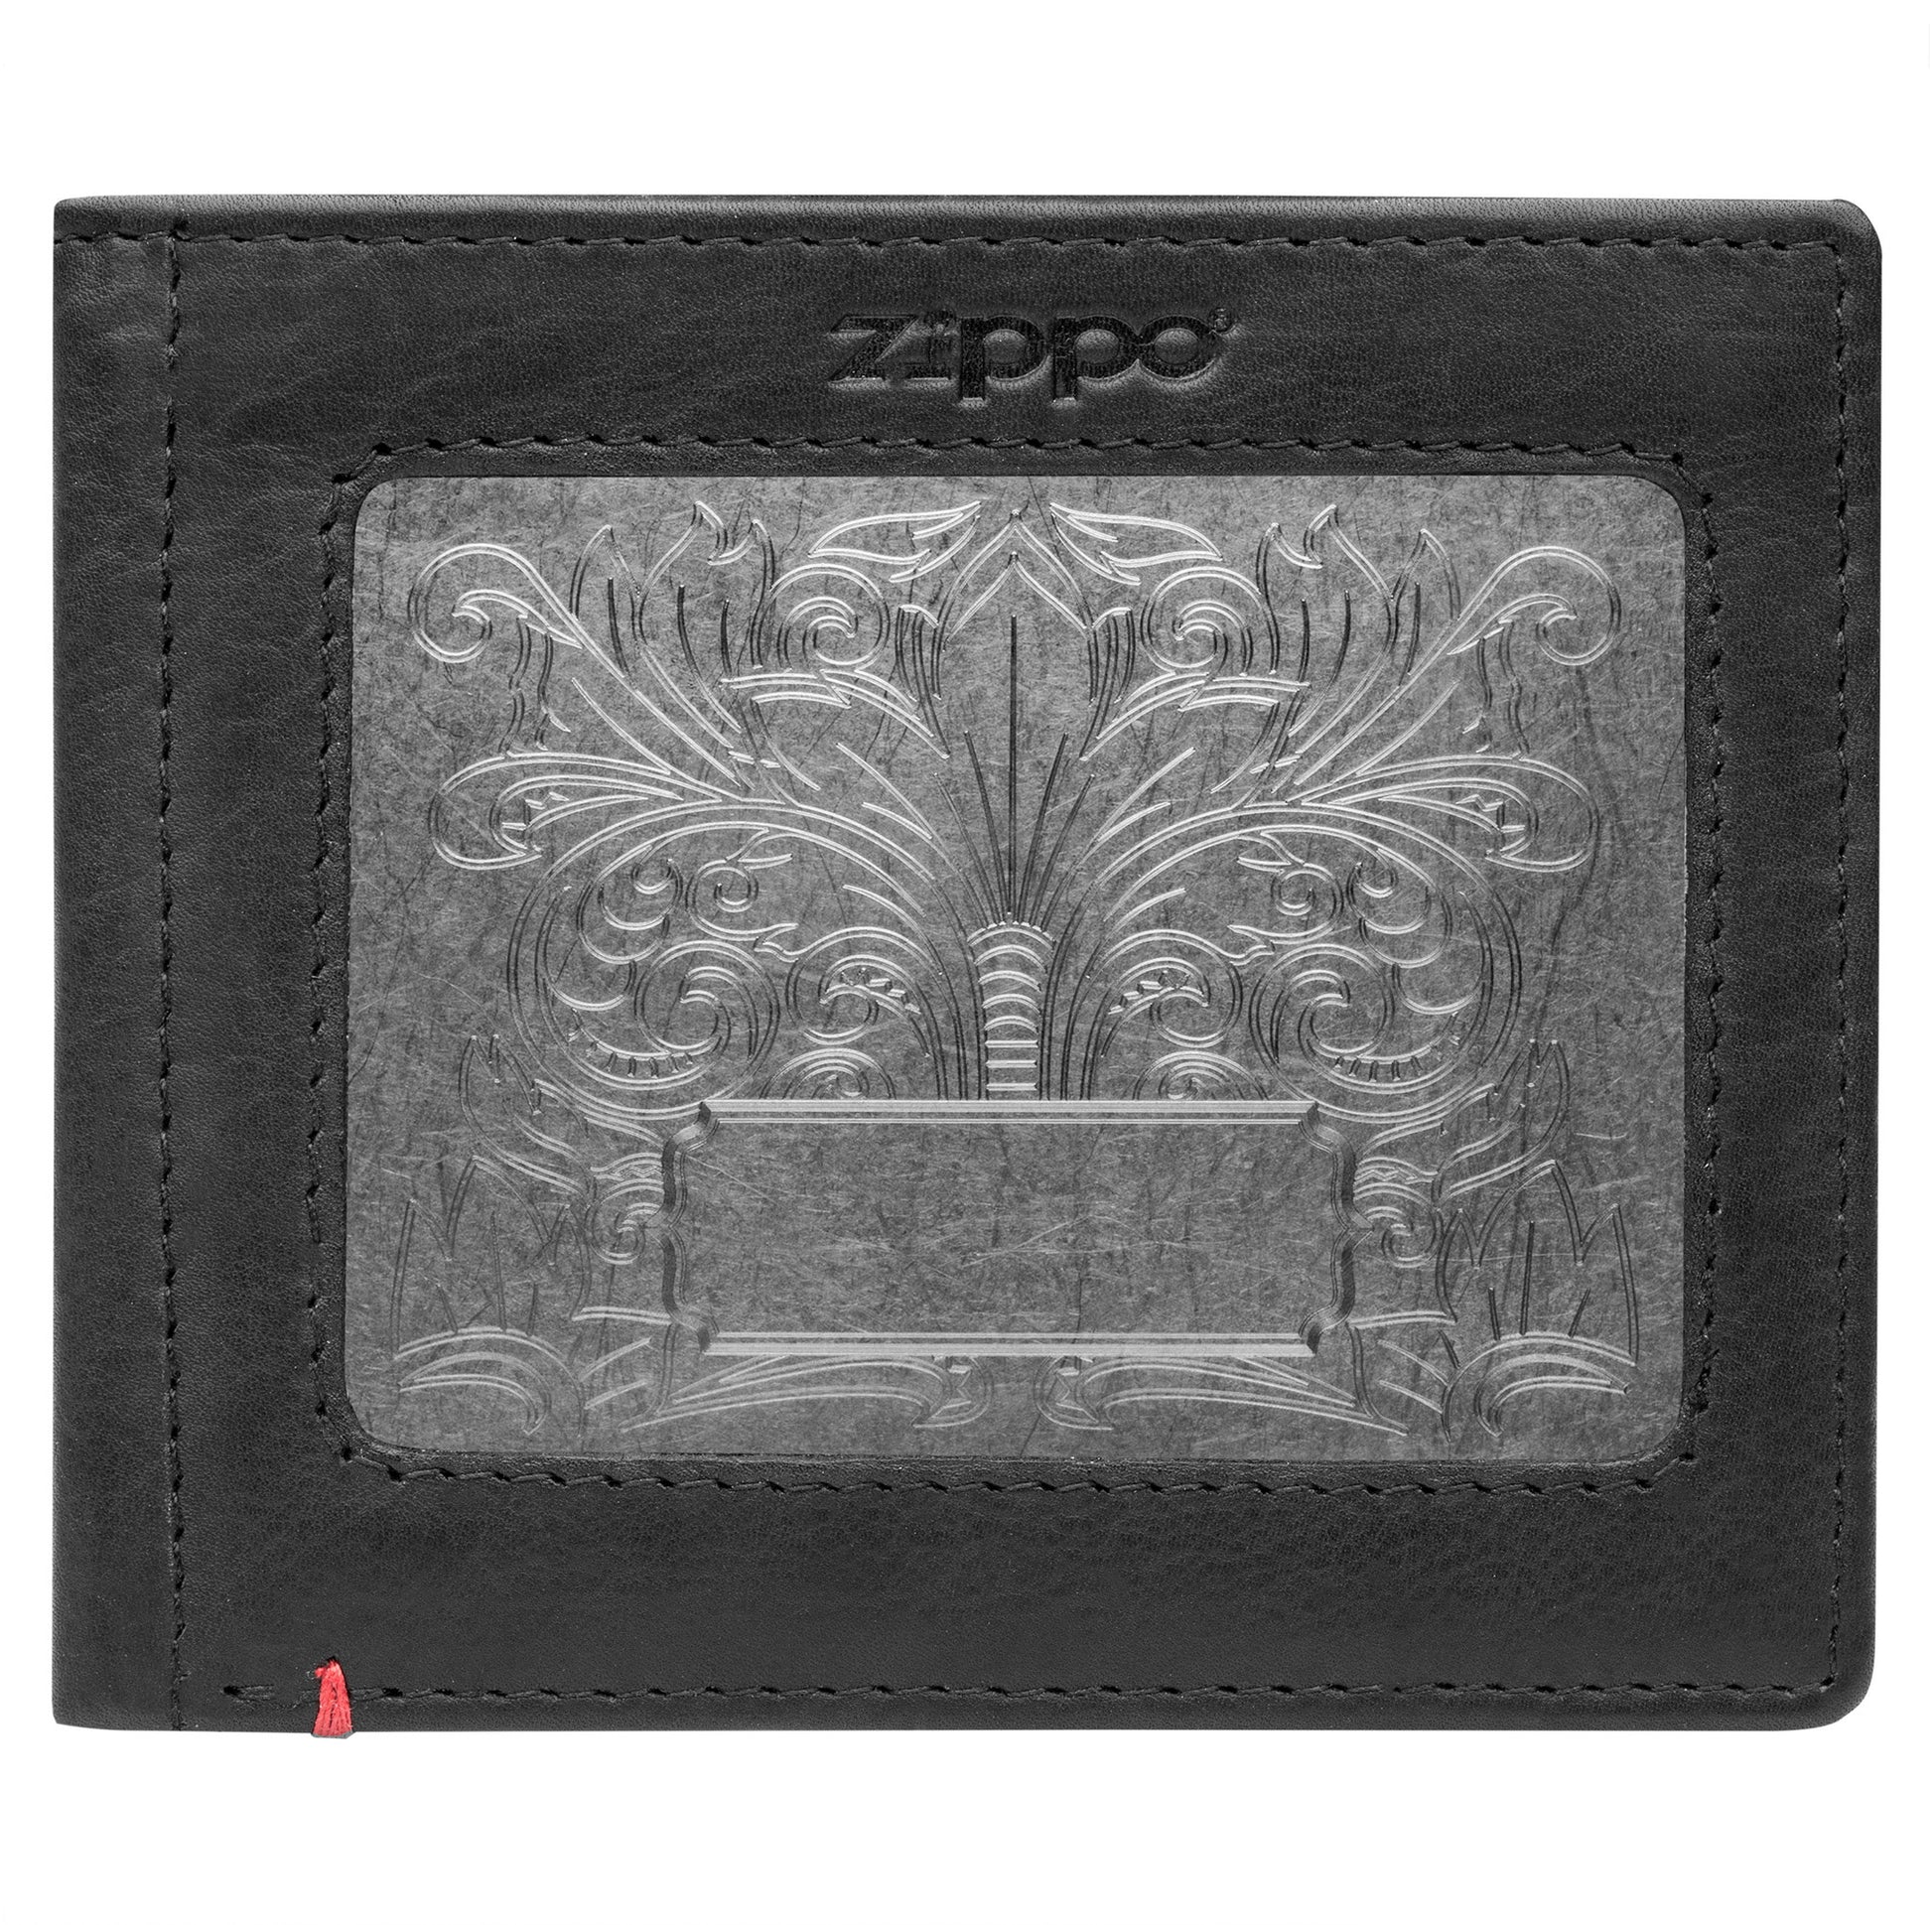 Front of black Leather Wallet With Fandango Metal Plate Design - ID Window